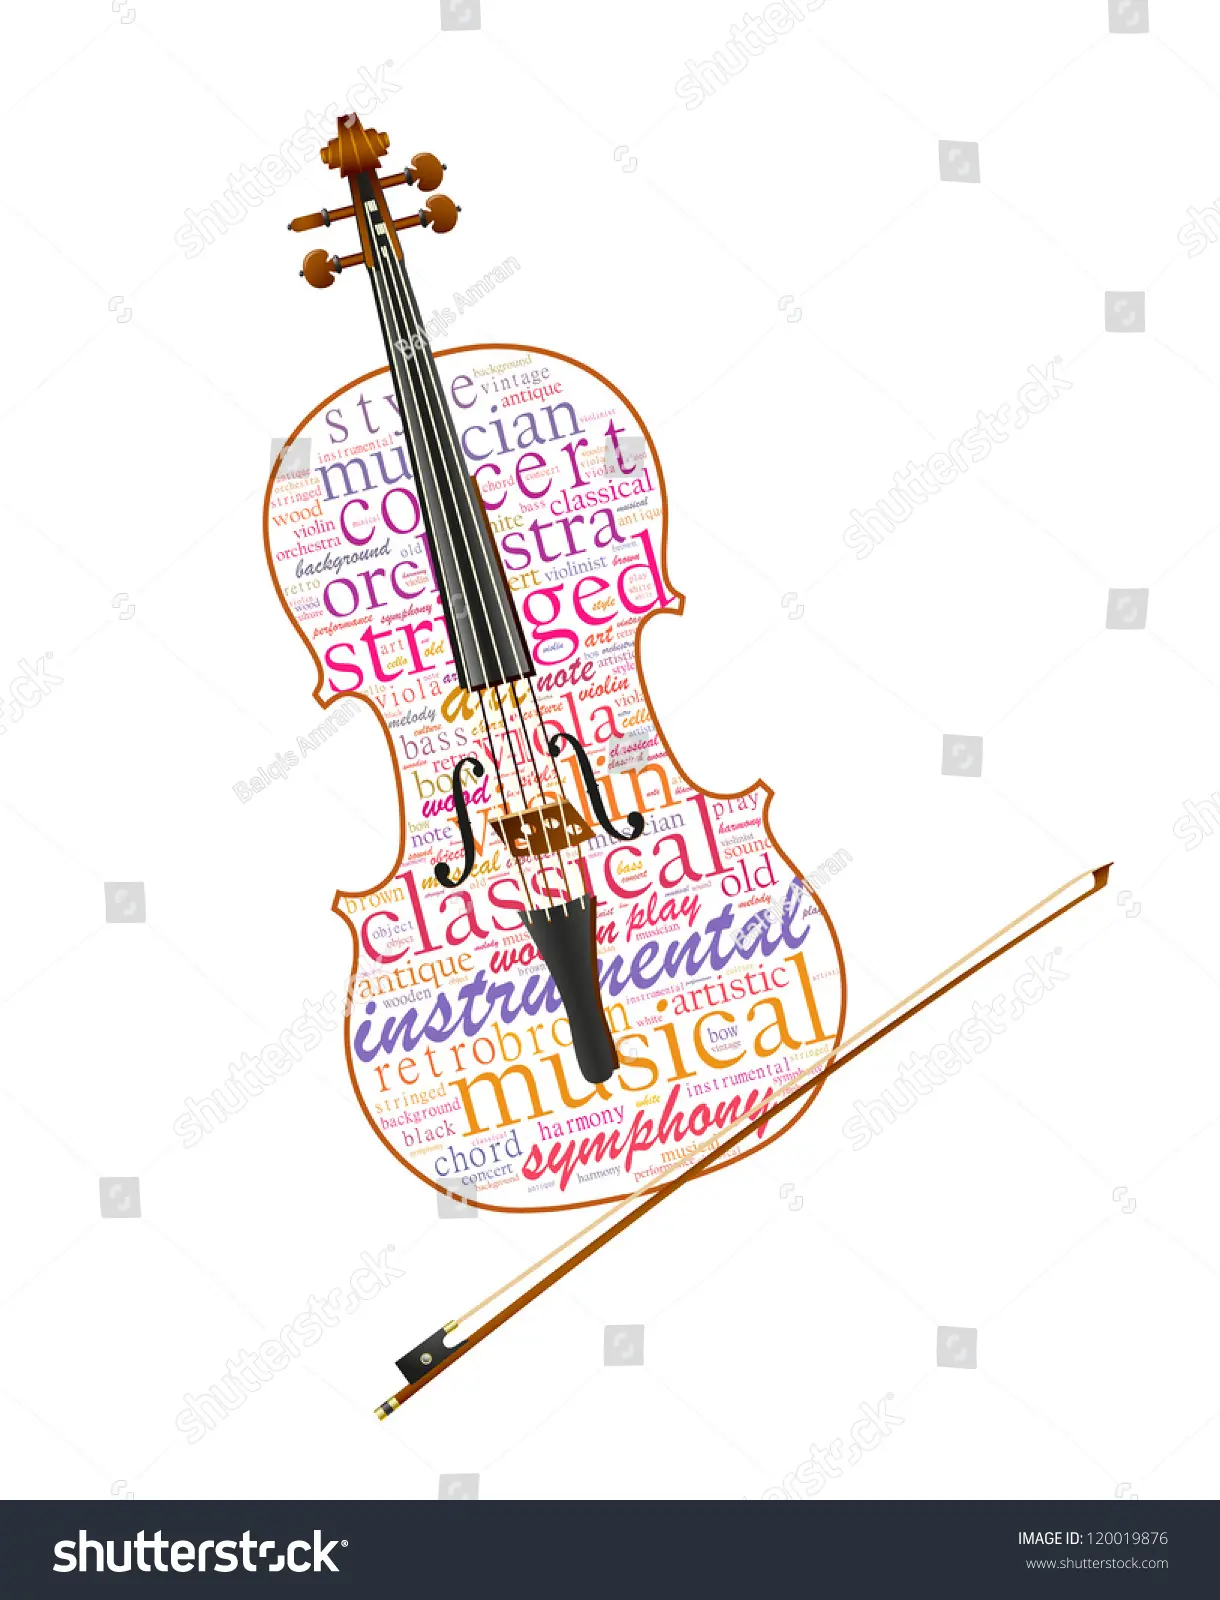 violin words - What words can I make with violin